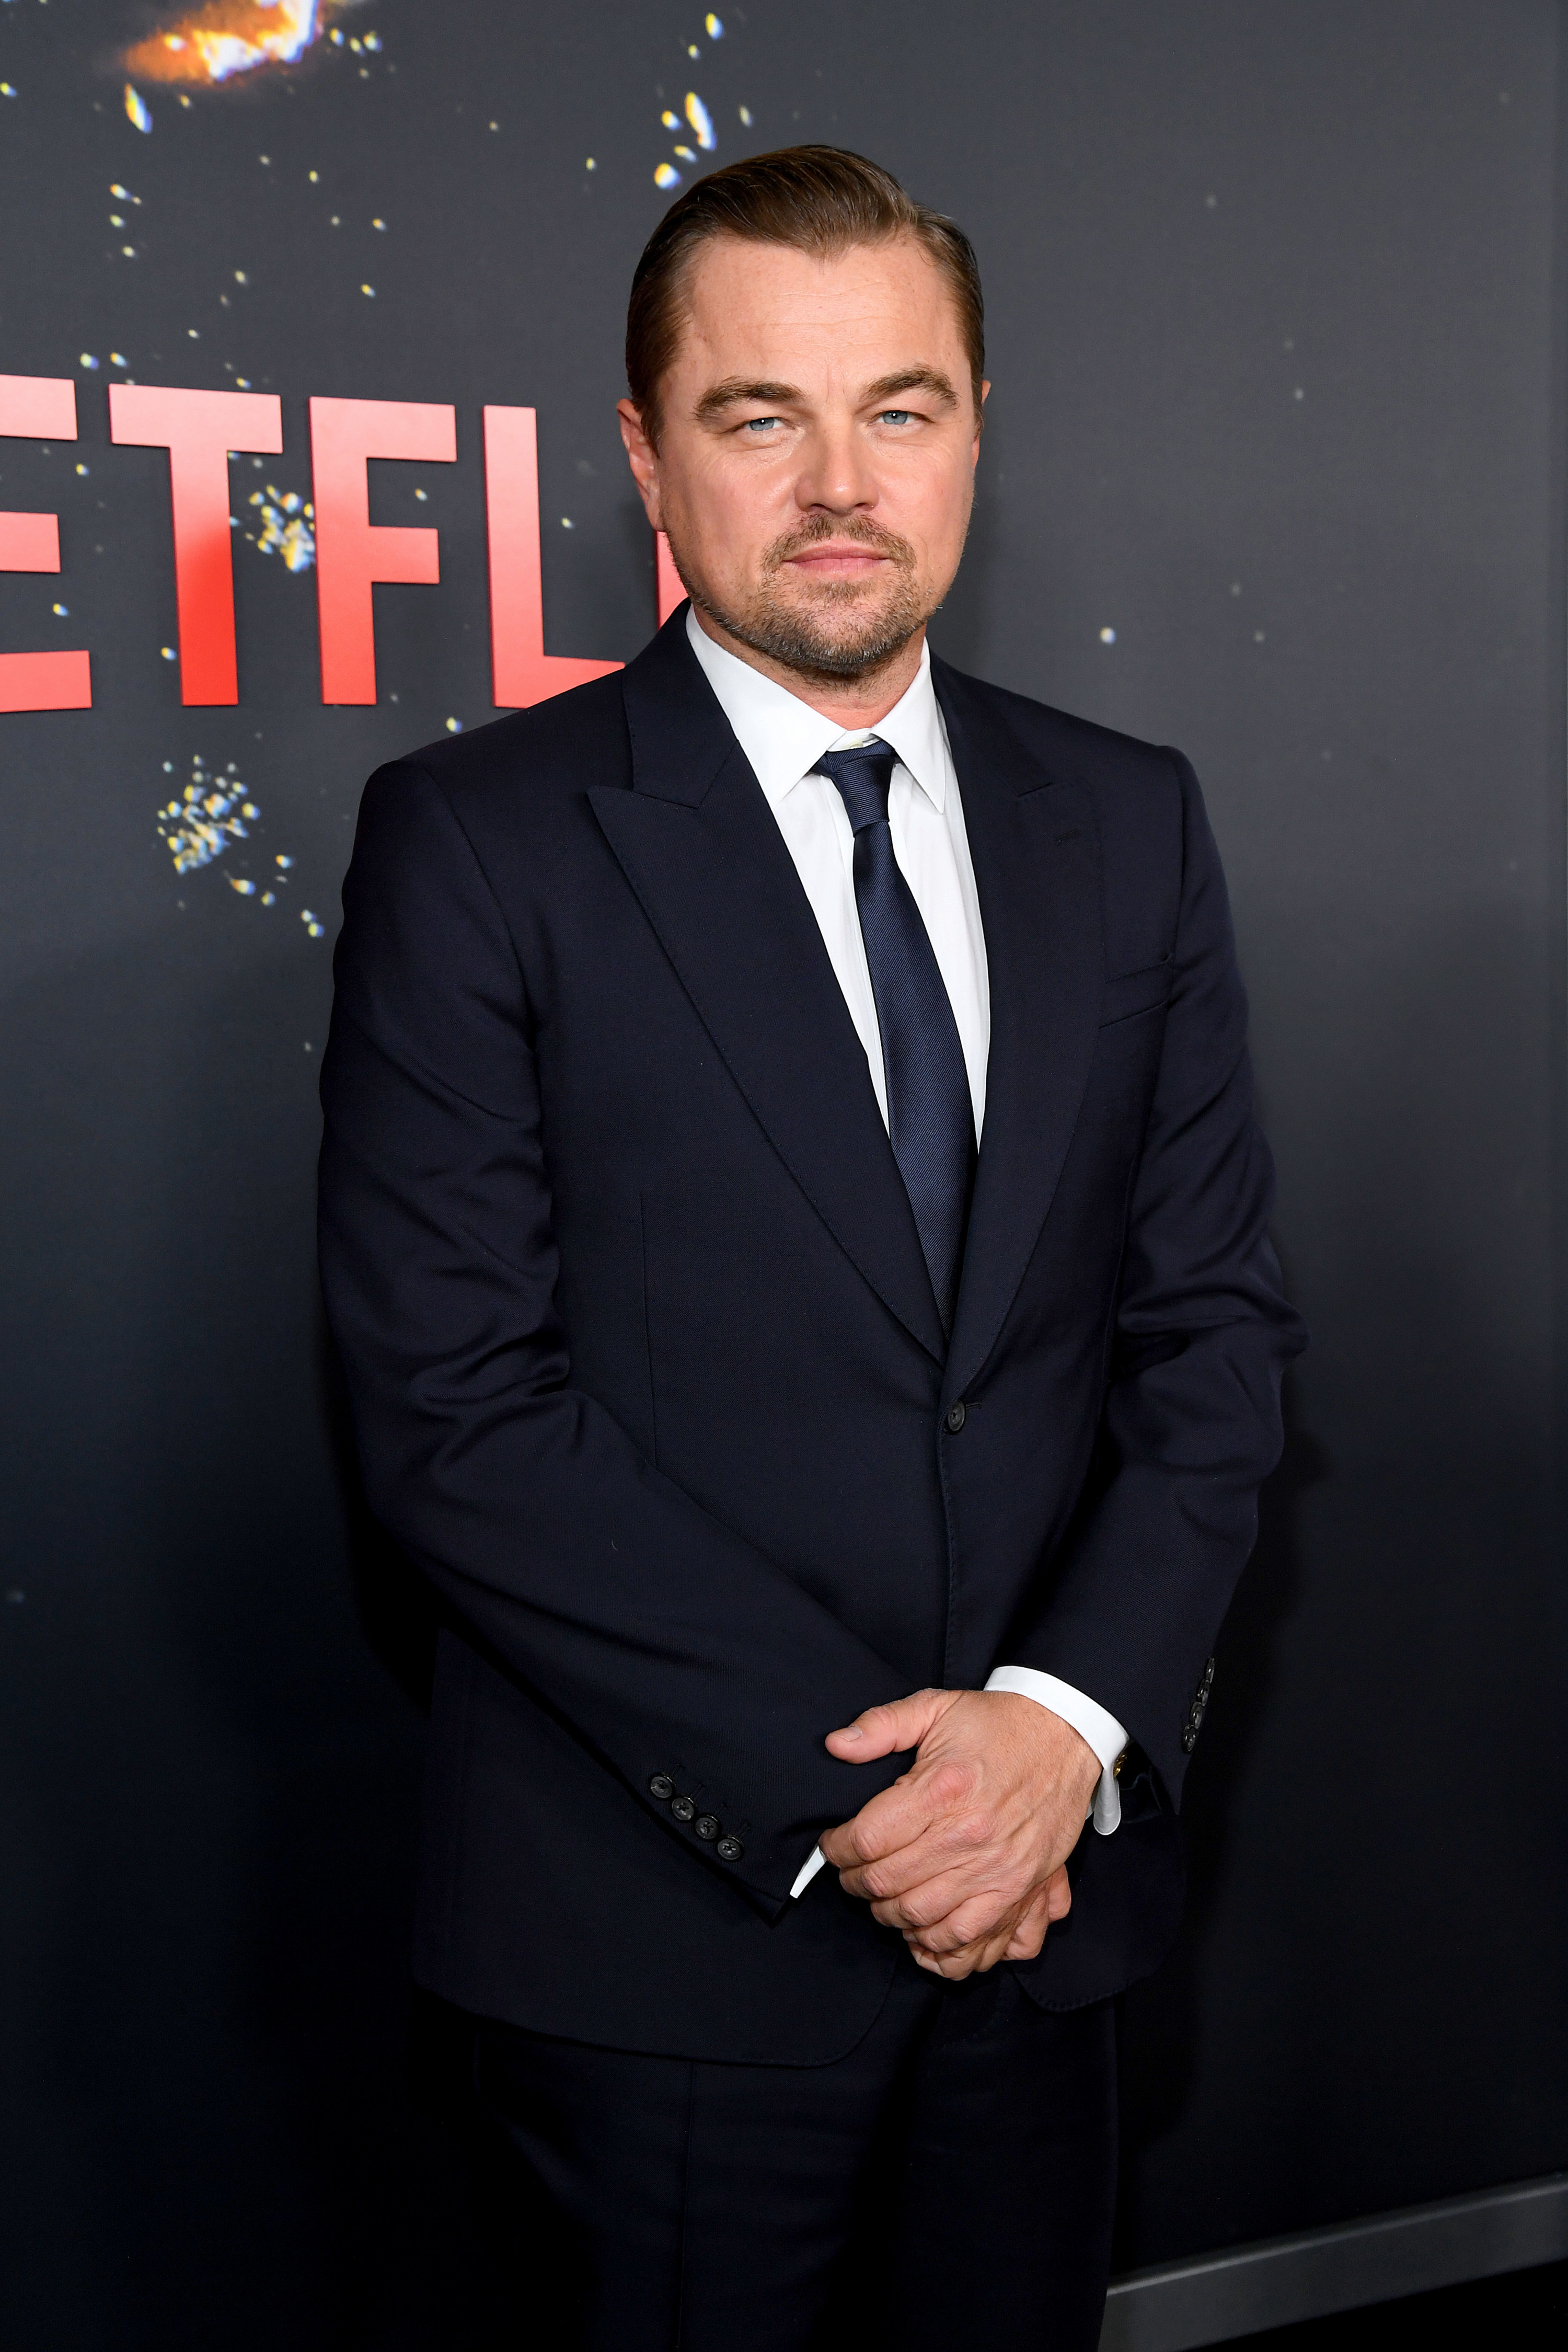 Leo is in a tux at a netflix premiere